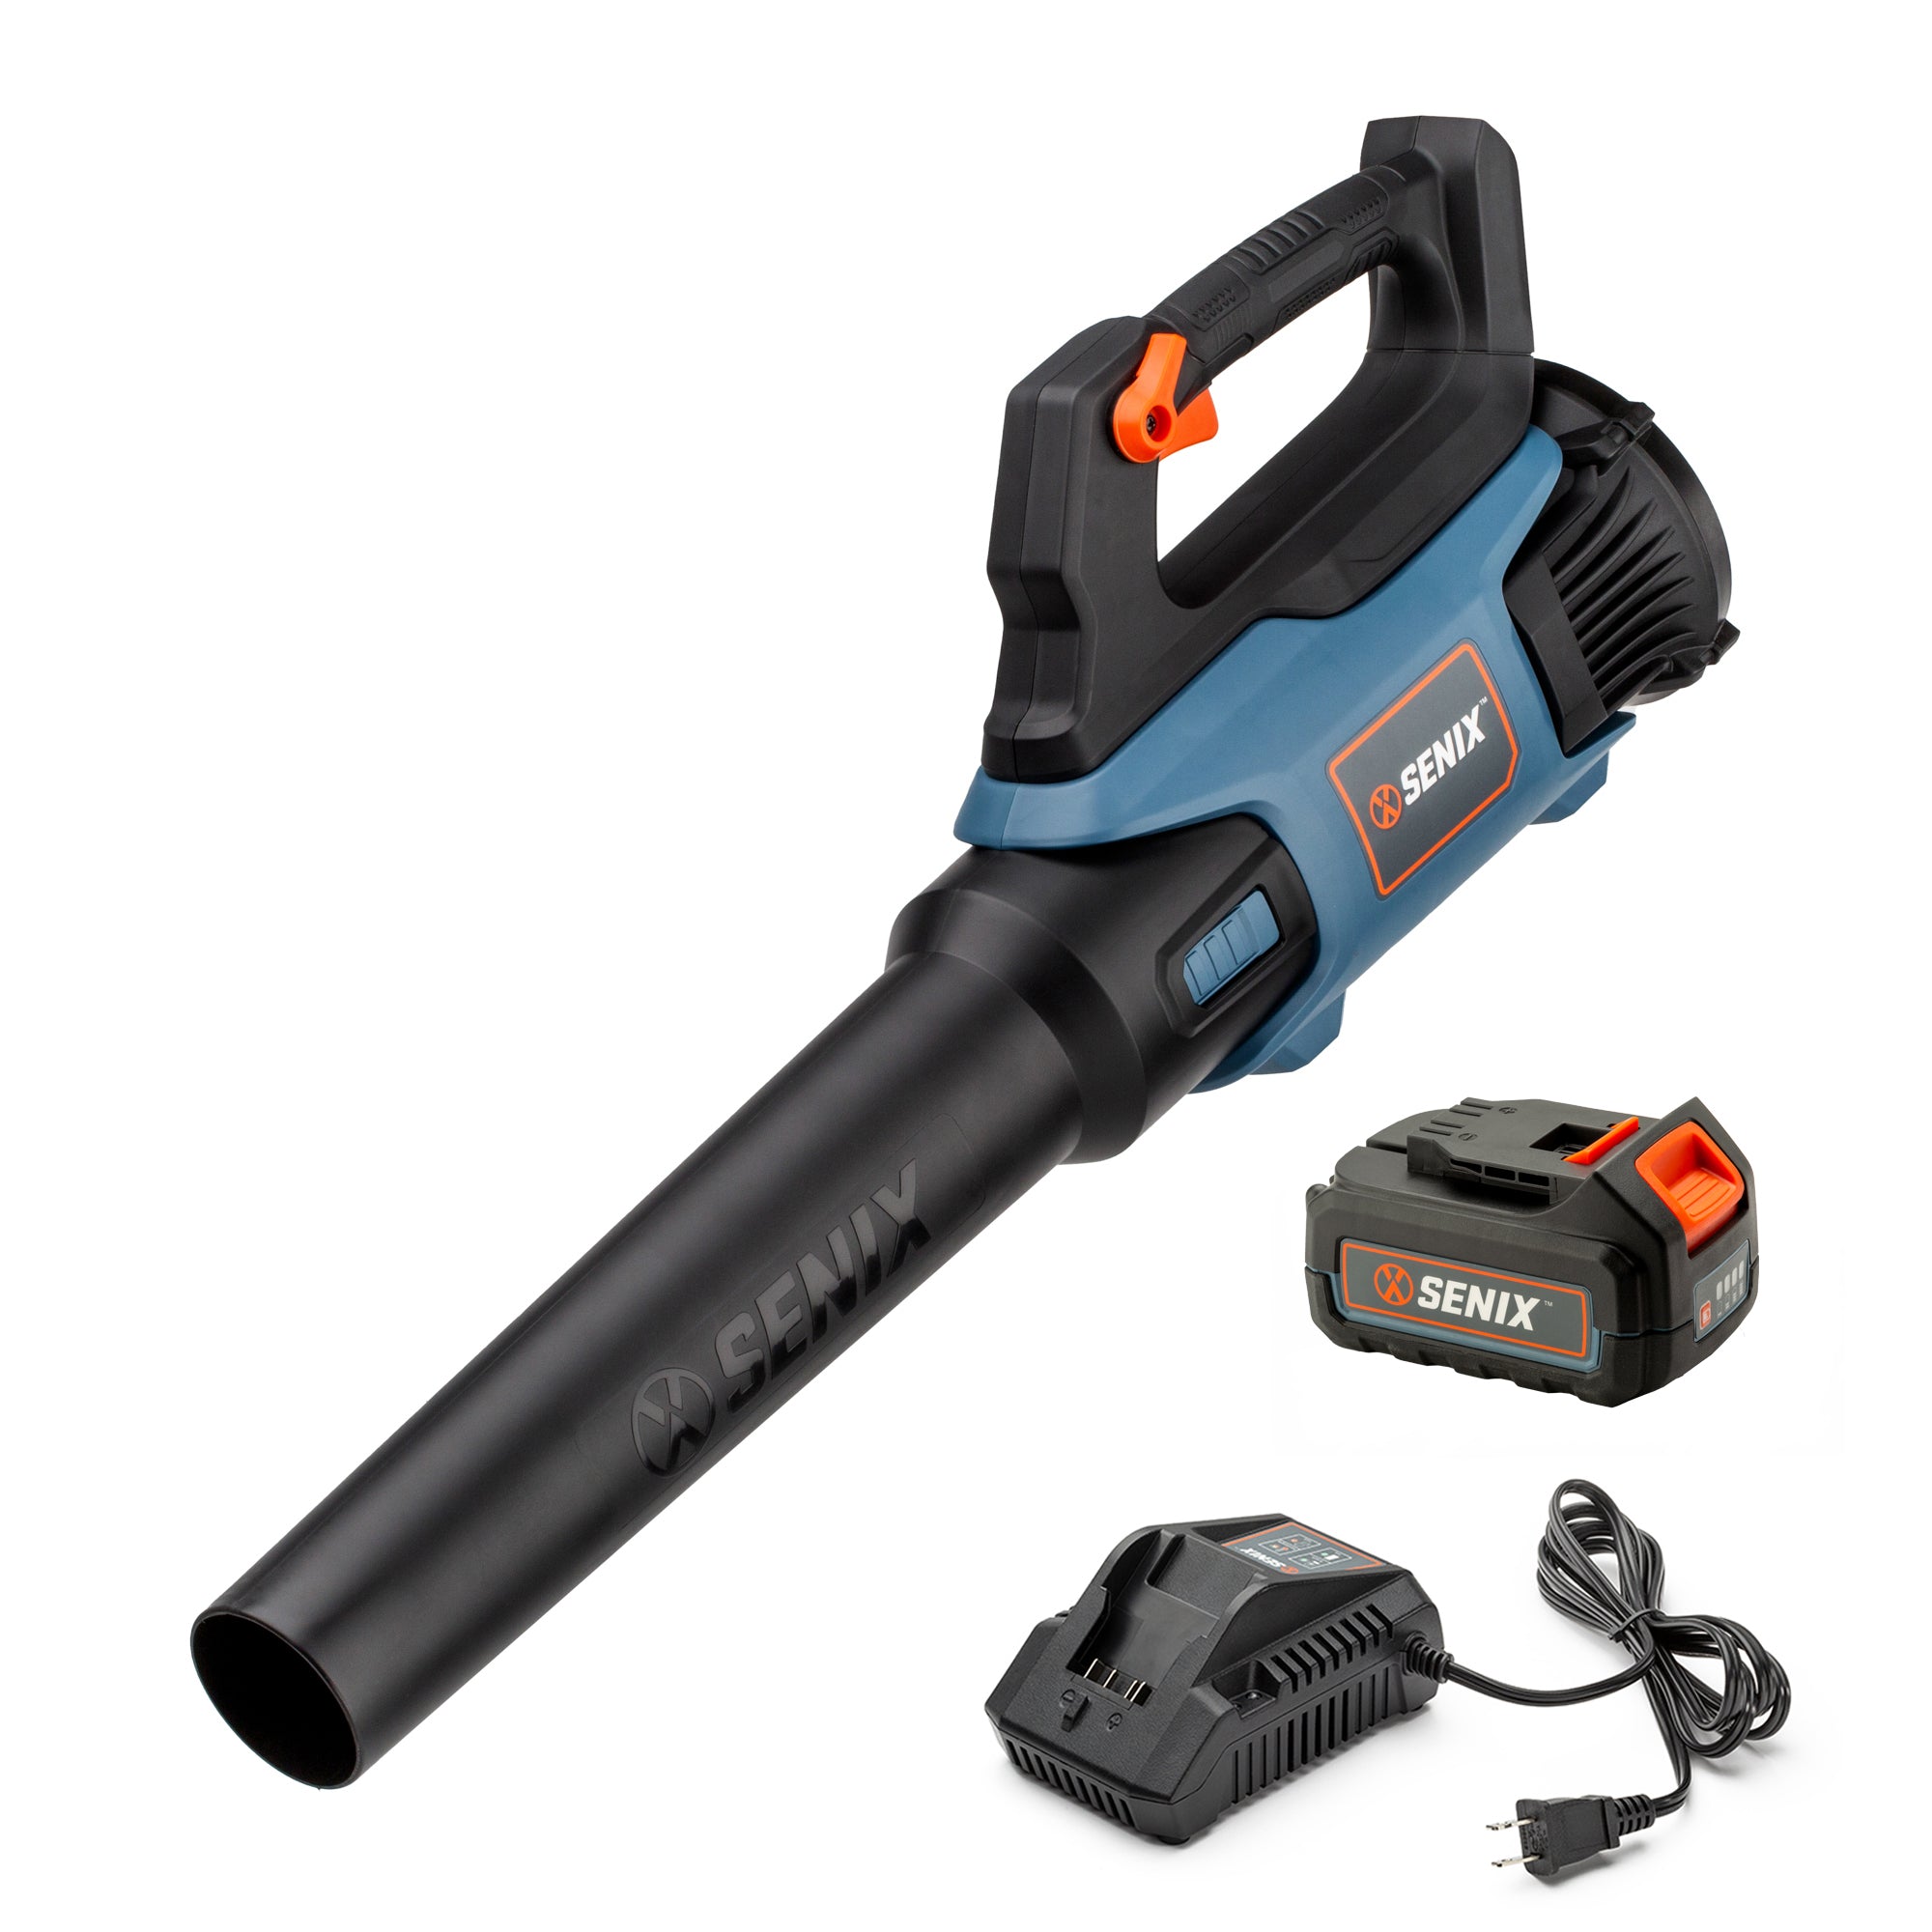 Senix 20 Volt MAX* Cordless Leaf Blower (Battery and Charger Included), Blax2-m, Blue